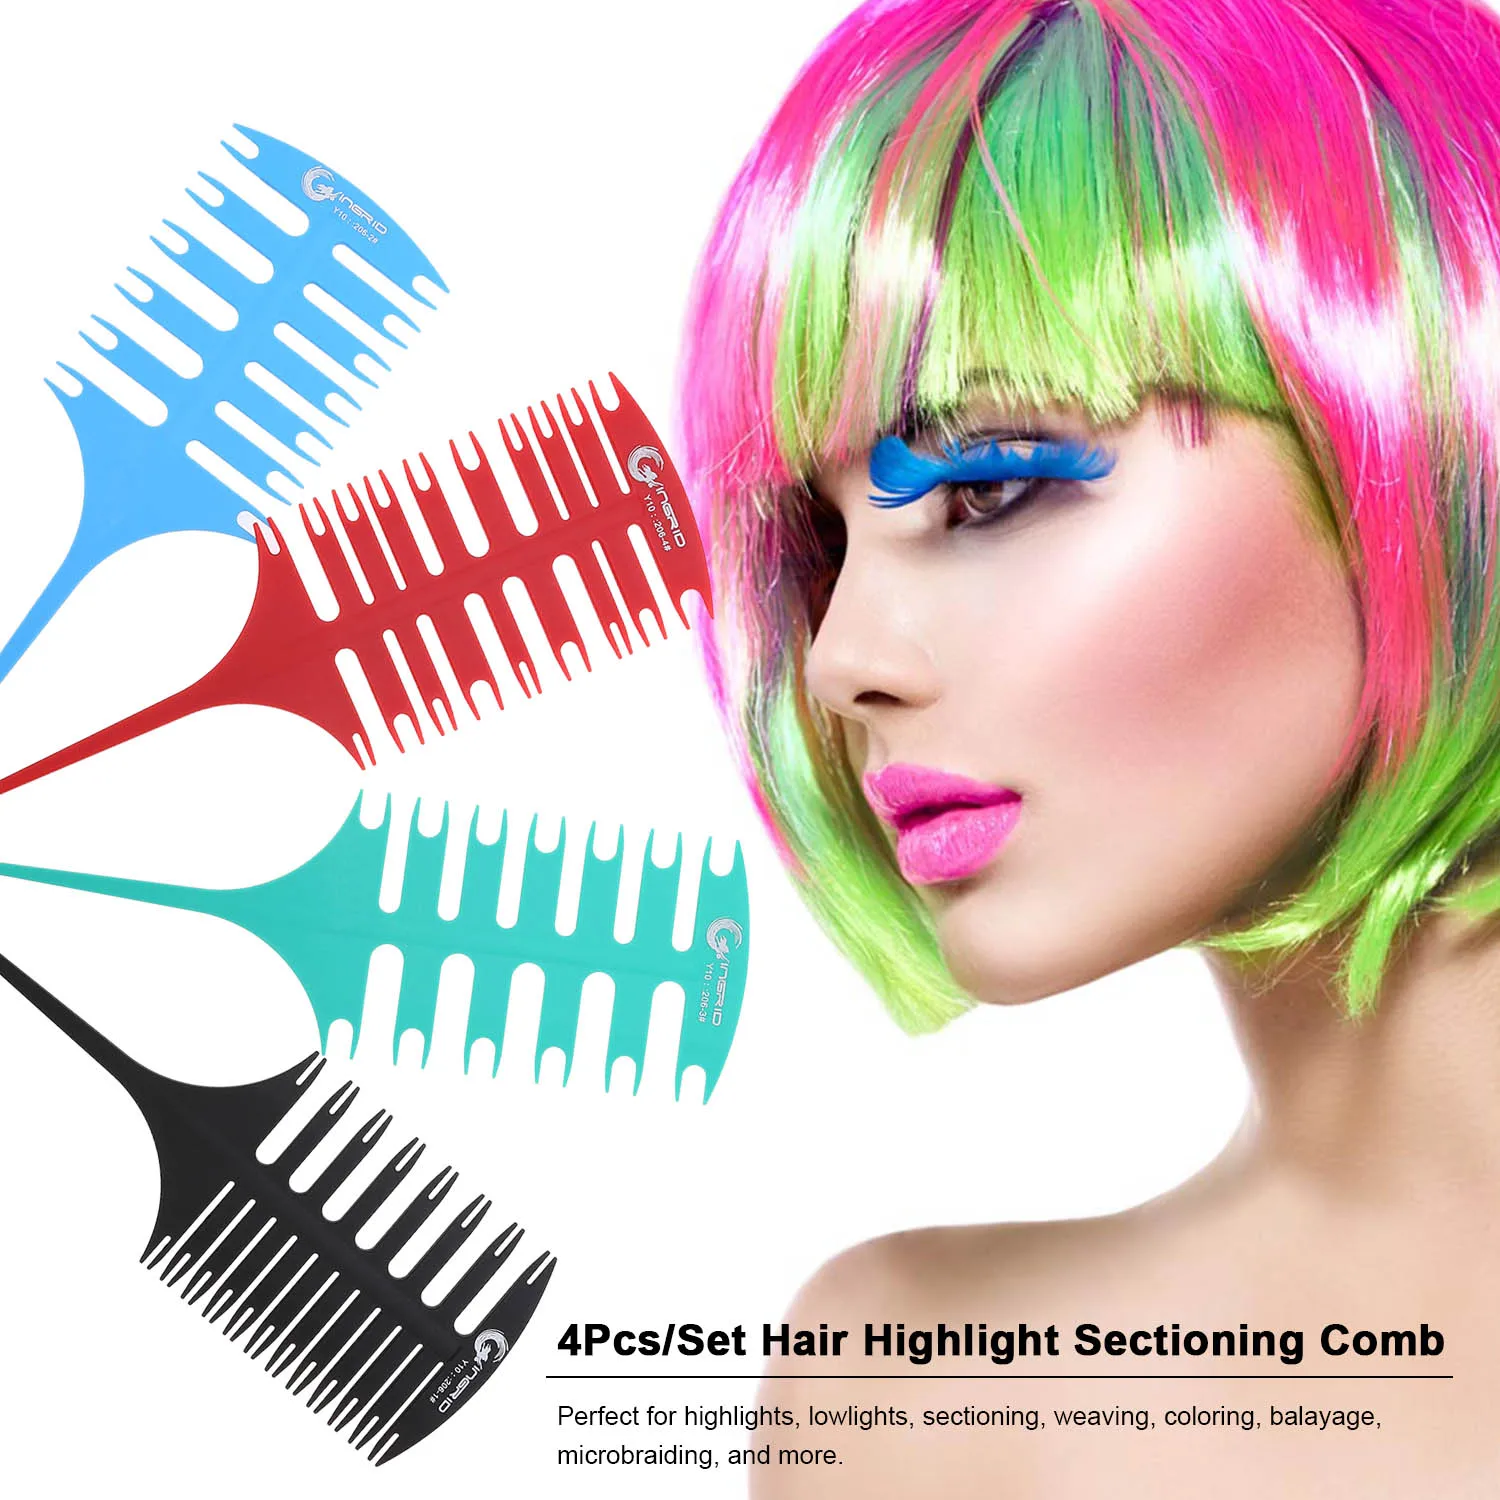 4Pcs/Set Hair Highlight Sectioning Comb for Hair Coloring 3-Way Hair Dye Styling Highlighting Weaving Comb Set Styling Comb